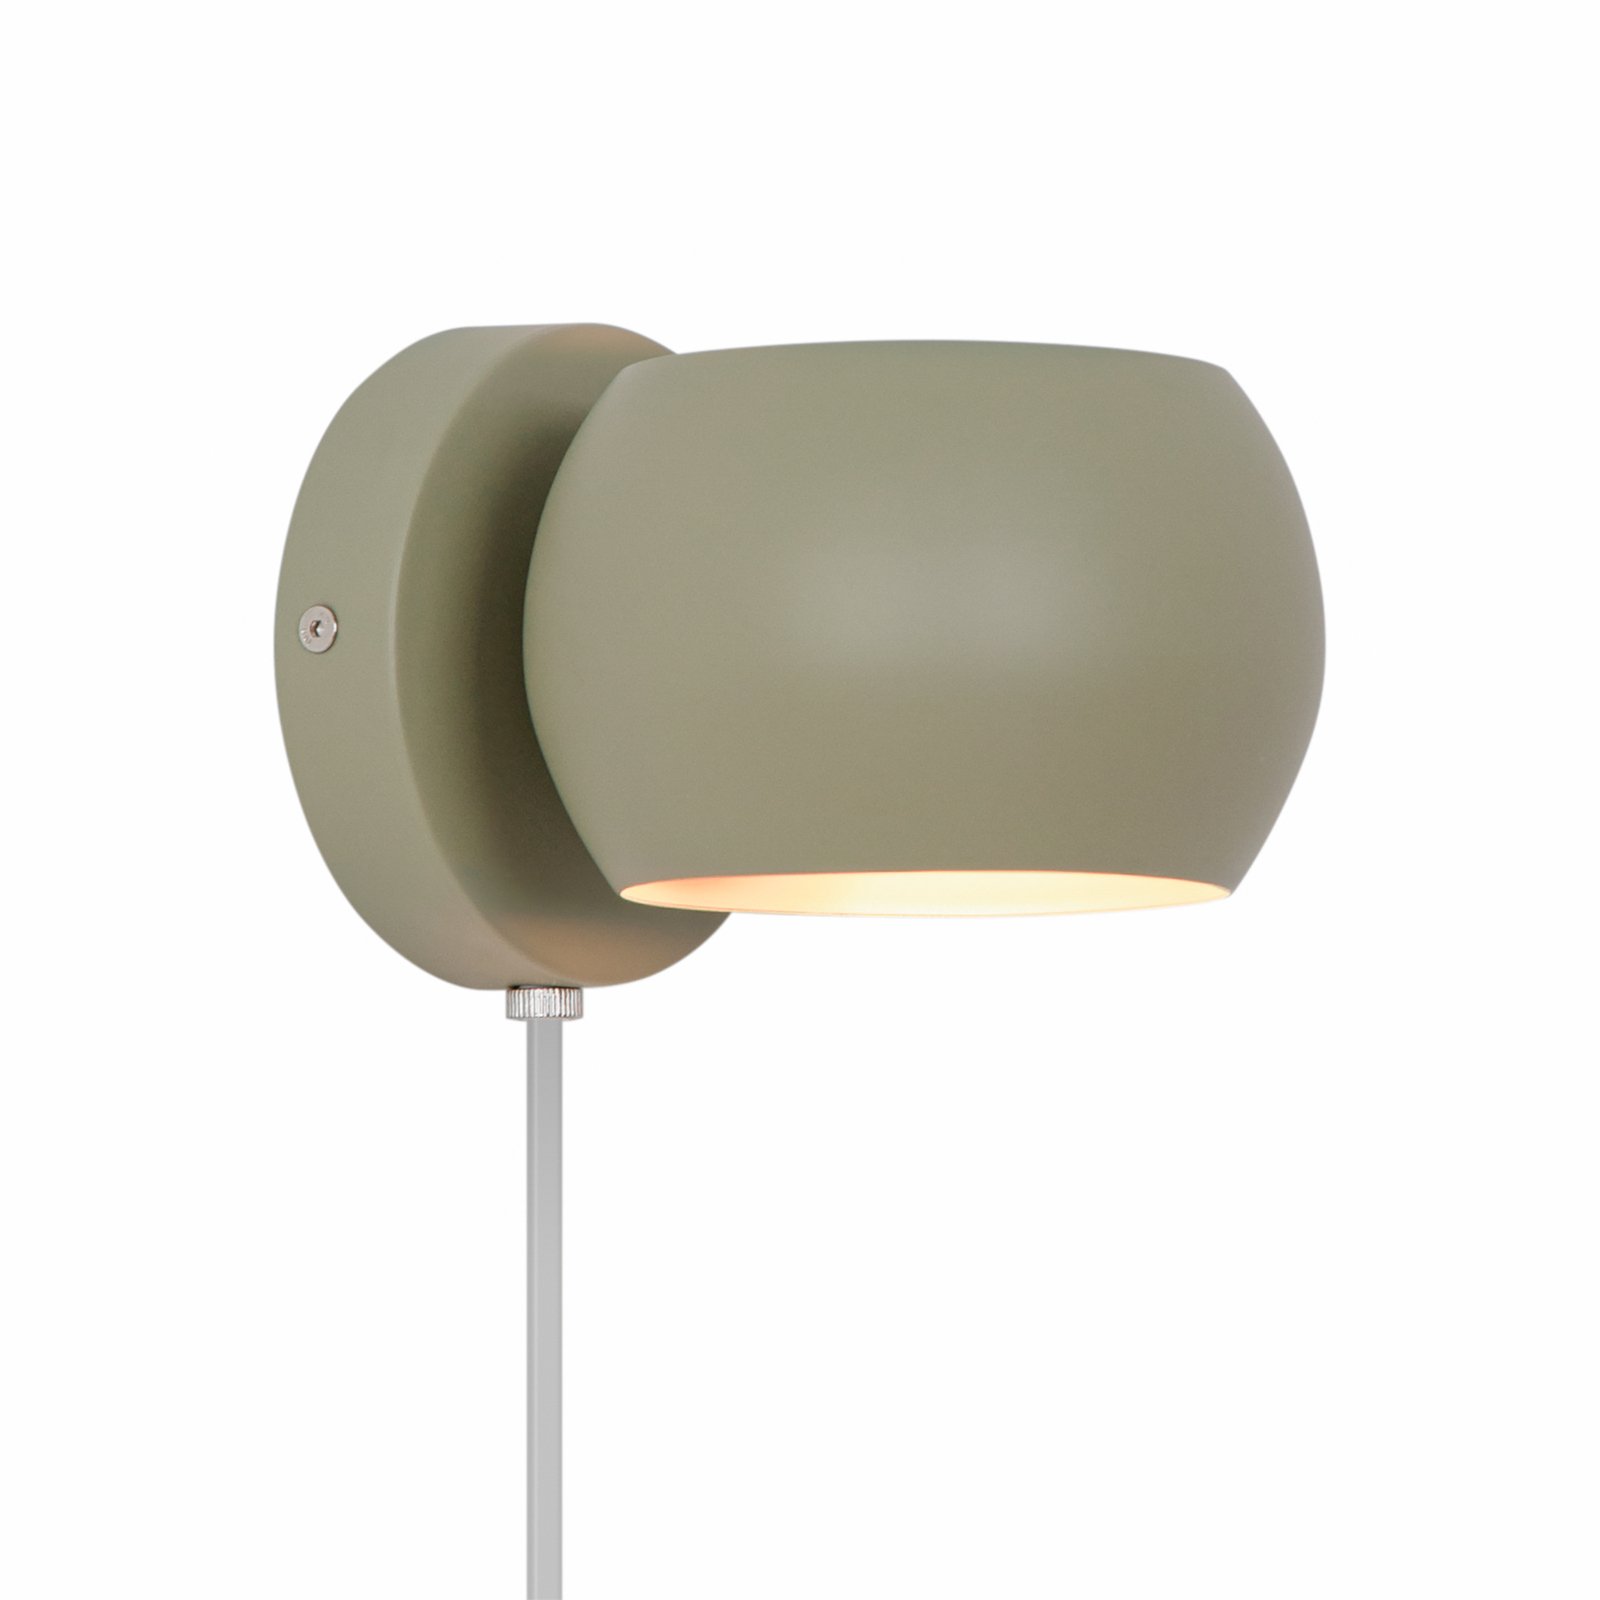 Belir wall light up/down with a plug, green